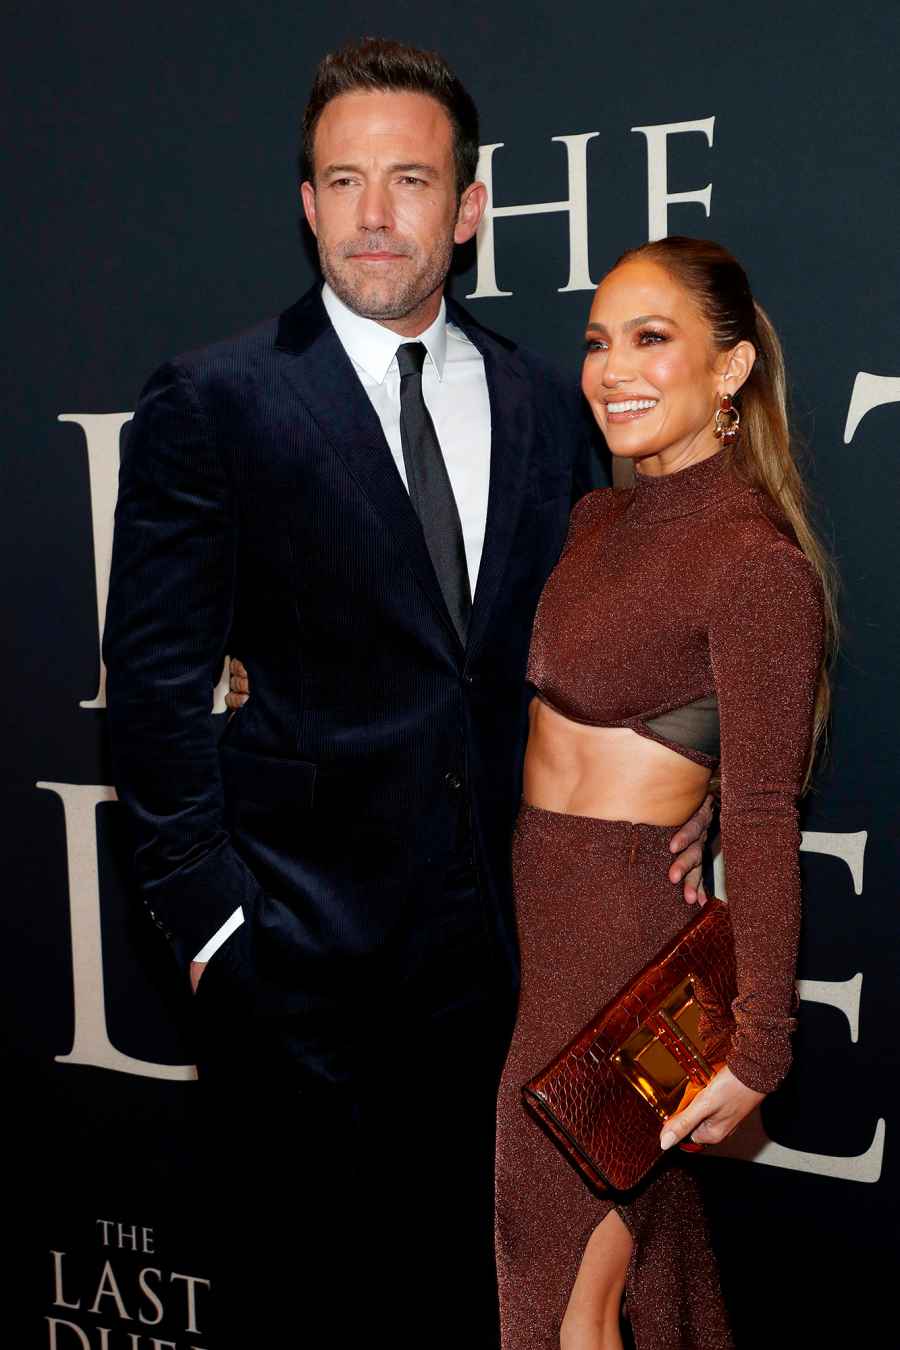 Ben Affleck and Jennifer Lopez attend The Last Duel NYC premiere.